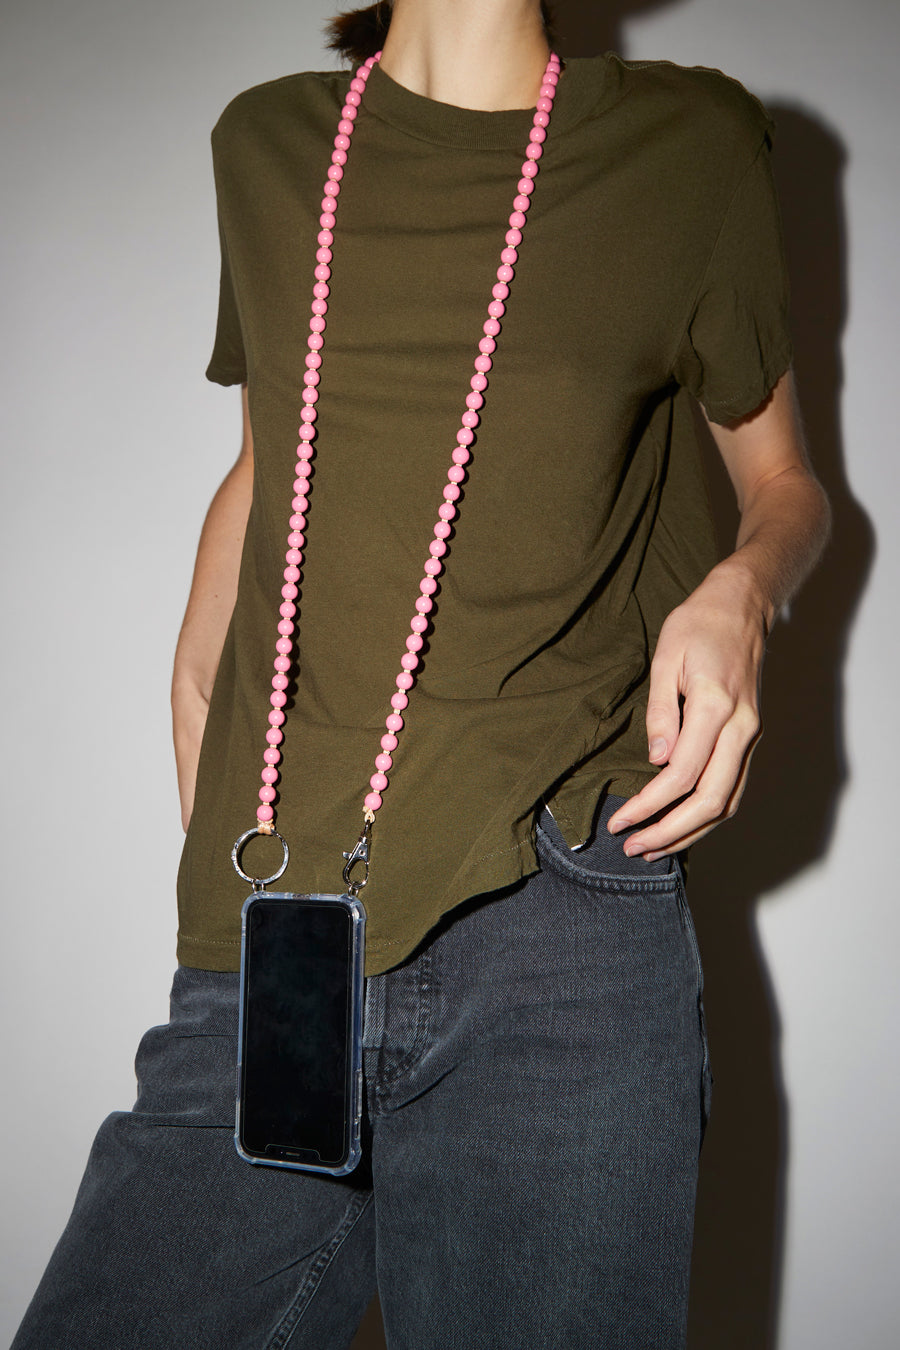 Ina Seifart Handykette Iphone Necklace in Rose with Beige Thread